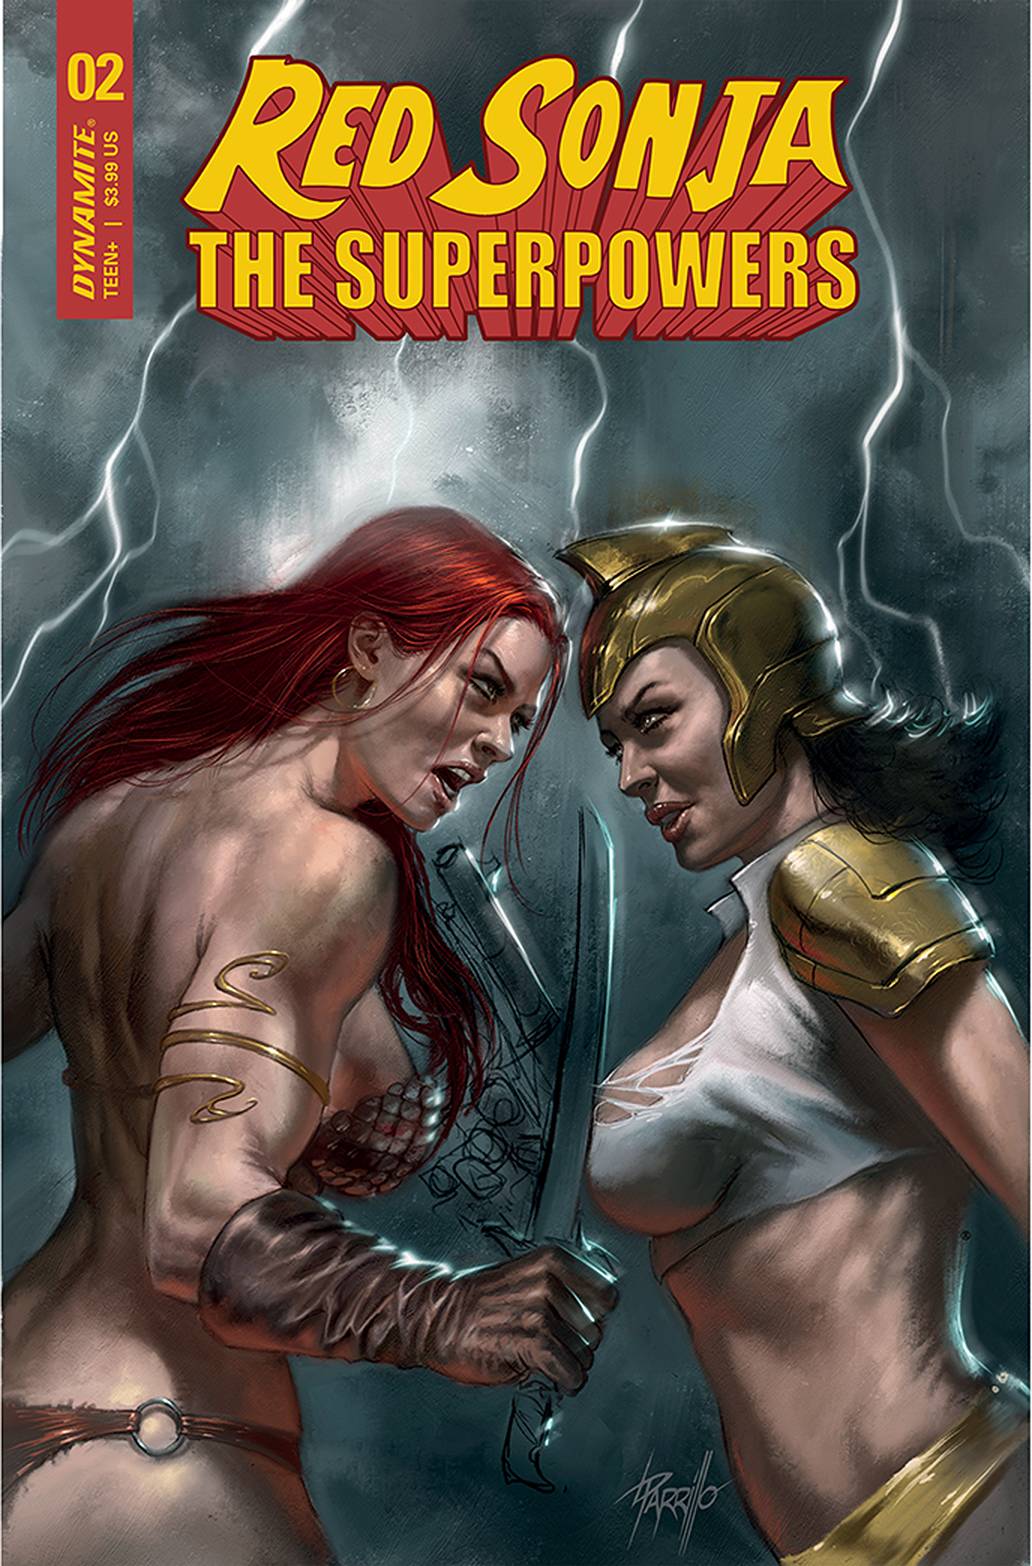 RED SONJA THE SUPERPOWERS #2 CVR A PARRILLO (REL 02/10/2021)